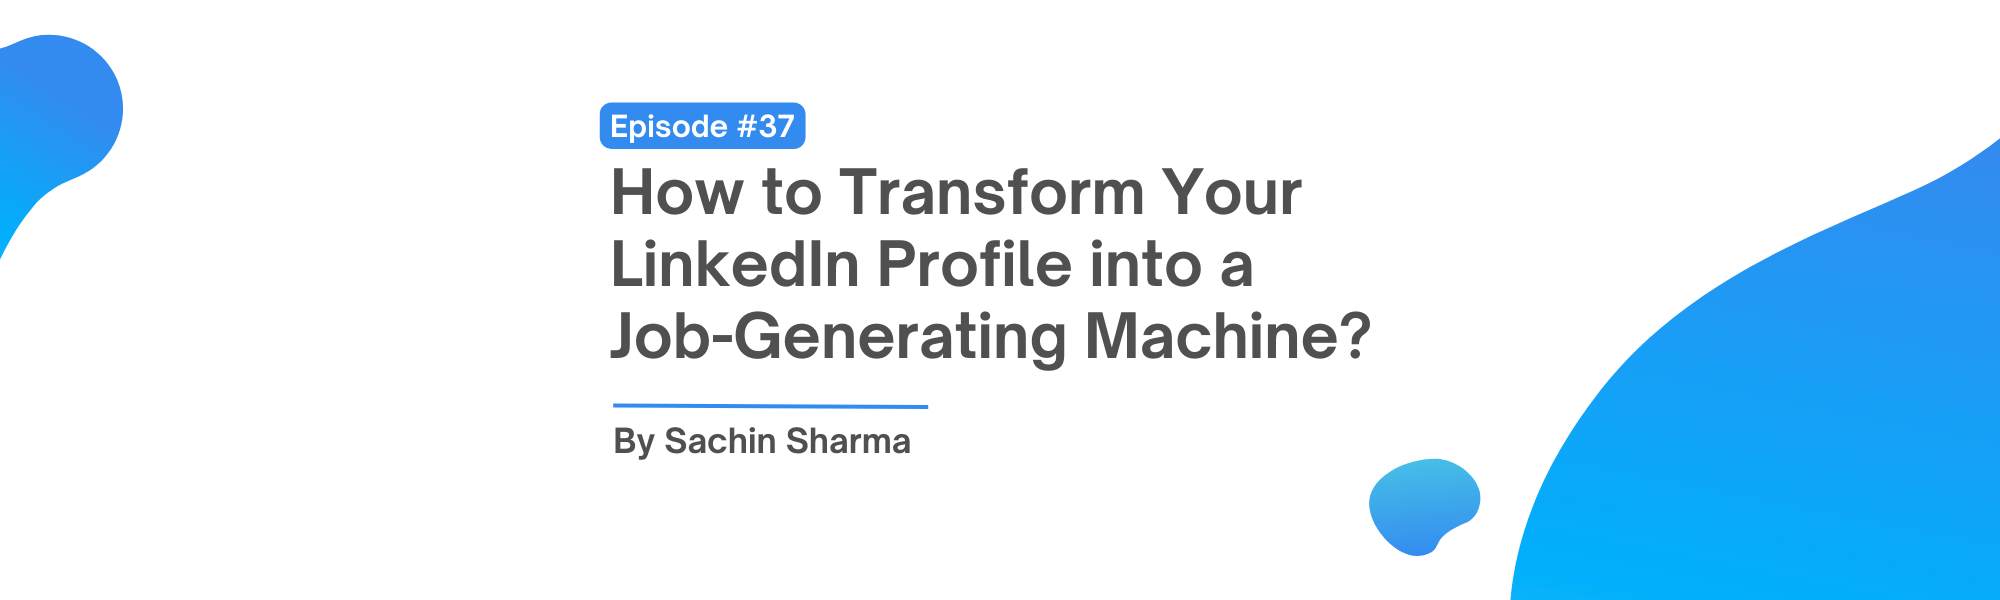 How to Transform Your LinkedIn Profile into a Job-Generating Machine?